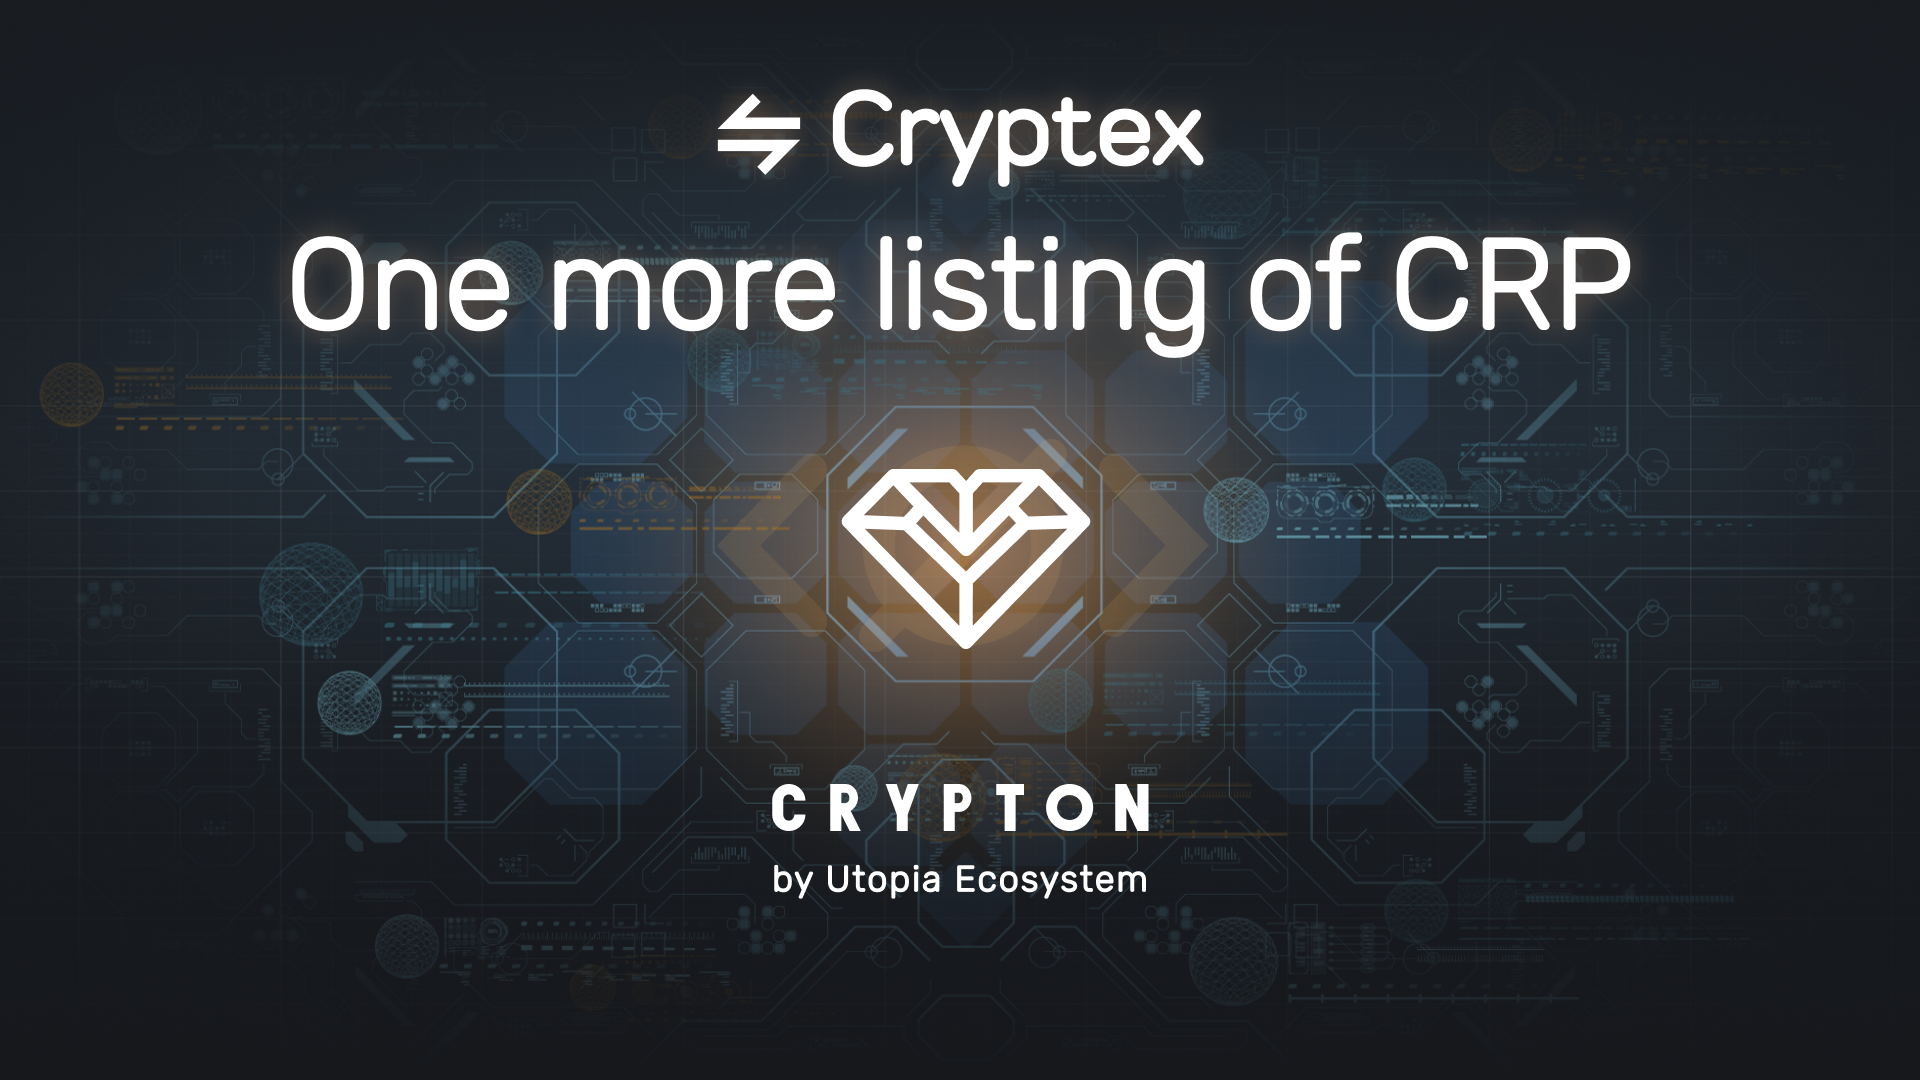 Utopia P2P’s Crypton (CRP) Now Available on Cryptex.net for USD